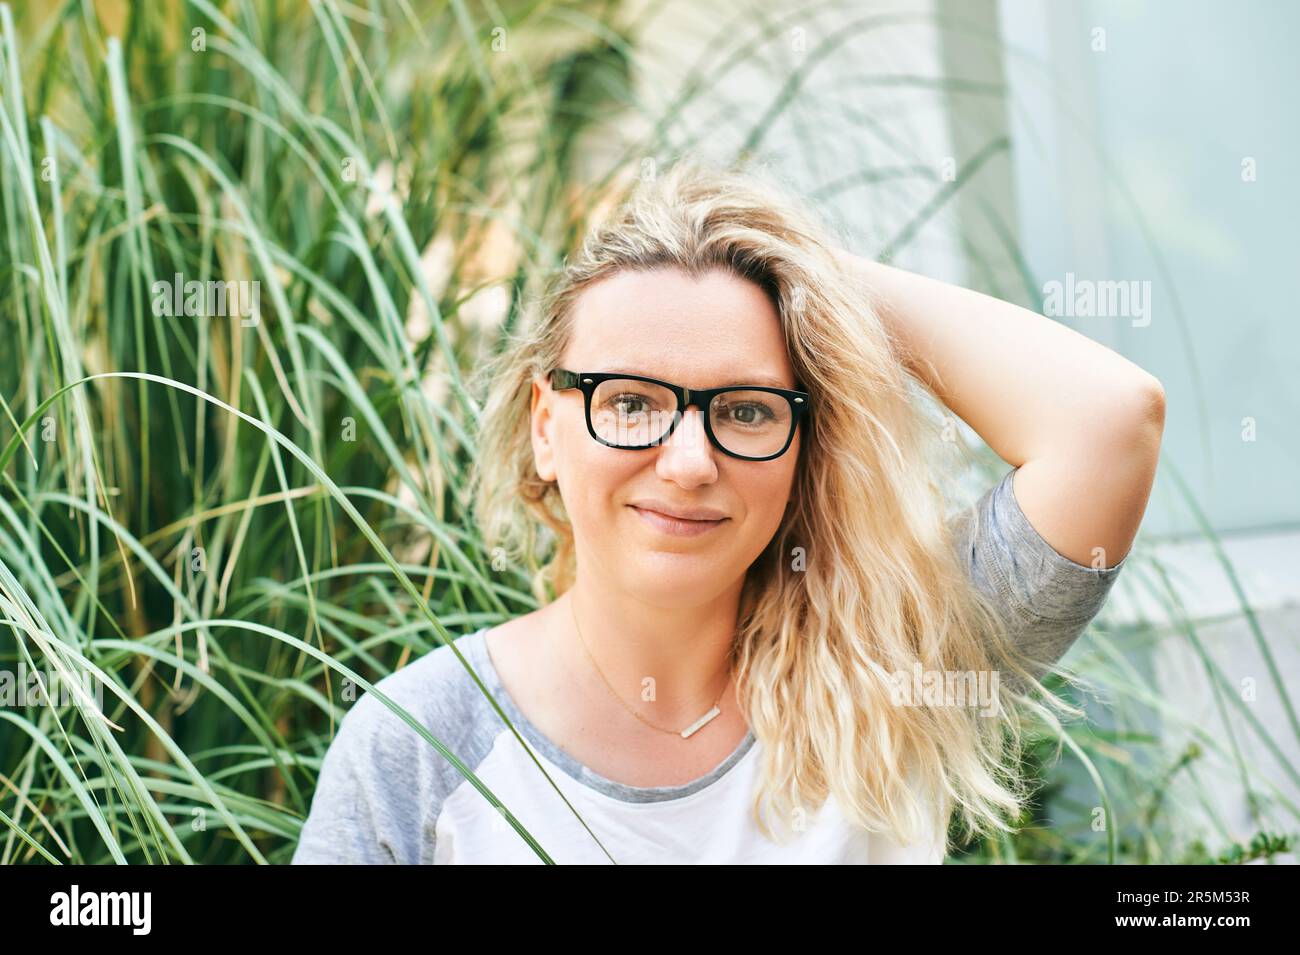 Close up portrait of middle age woman posing outside, wearing eyeglasses Stock Photo